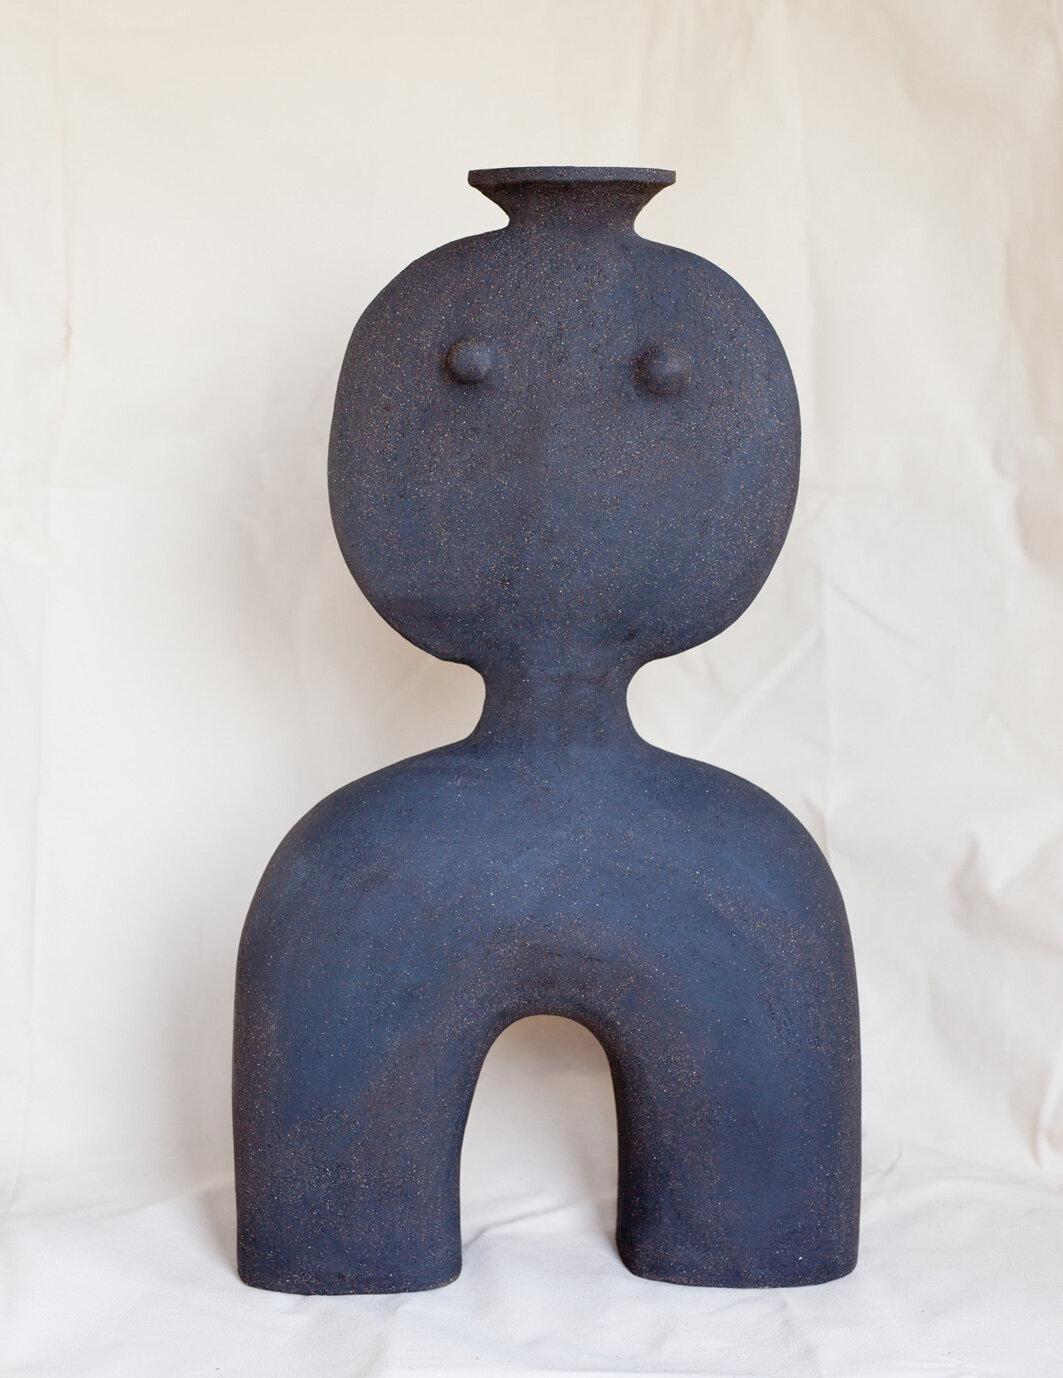 Project Haniwa*

Haniwa are the traditional clay figures buried with the dead during the Kofun period of Japan, in the belief the Haniwa would protect souls in the after life. My hope is that my Haniwa will protect our souls in this world.
- Noe